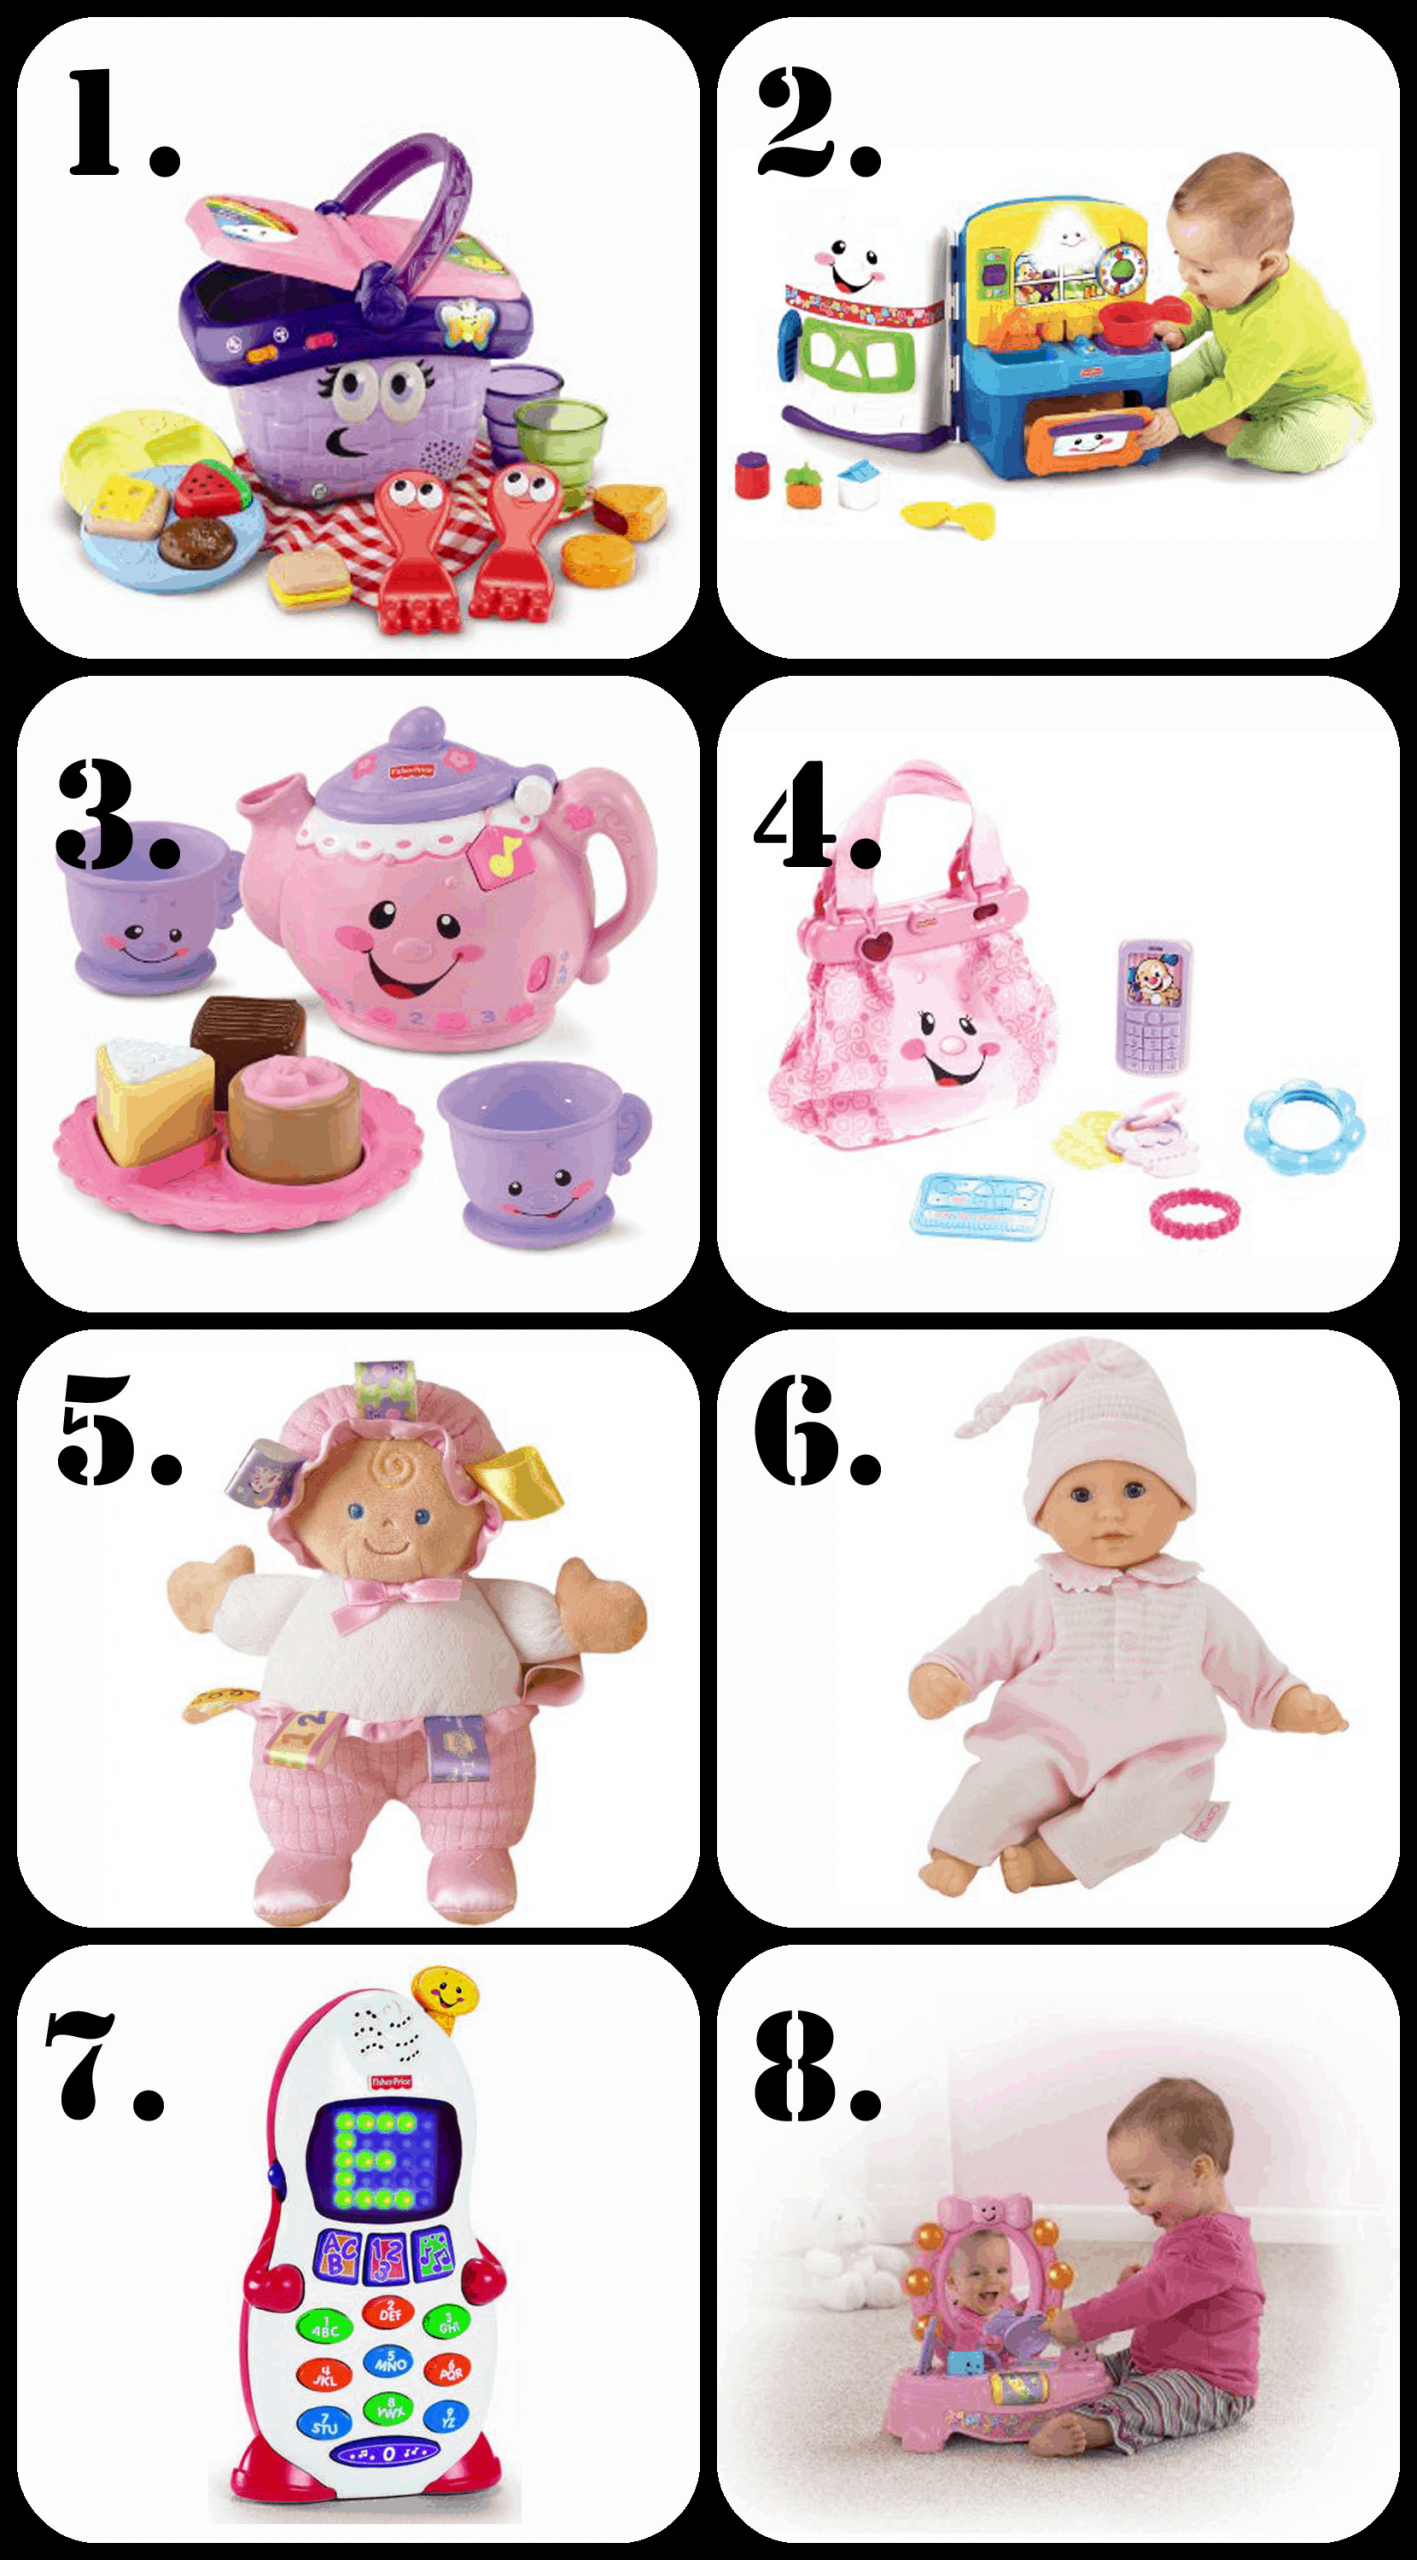 Birthday Gift Ideas For 1 Year Old Girl
 The Ultimate List of Gift Ideas for a 1 Year Old Girl